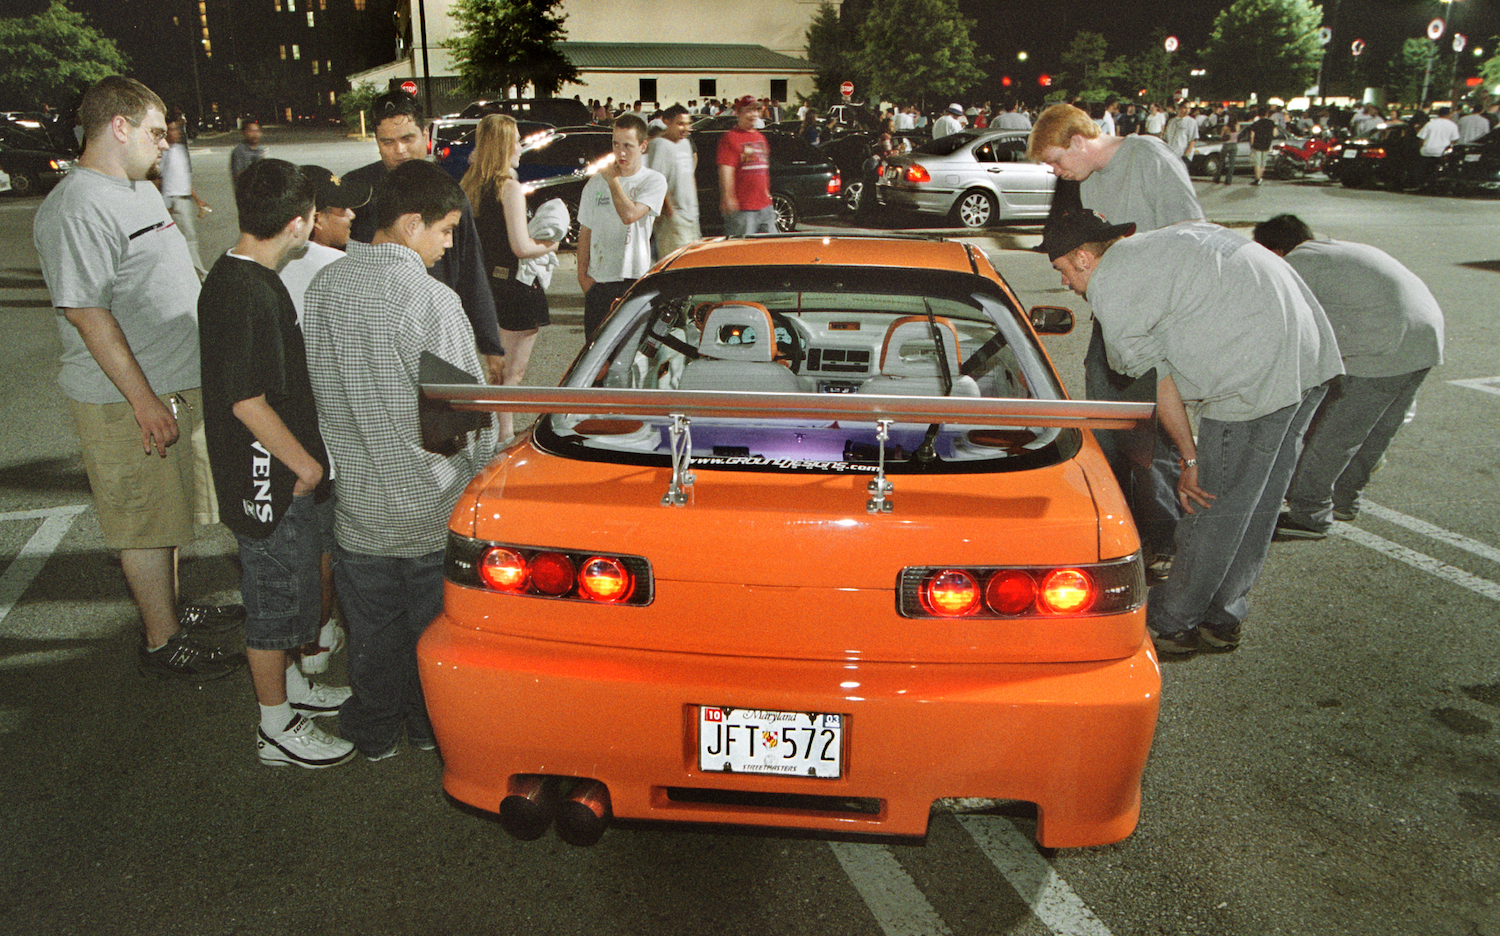 Acura Integra surrounded by kids